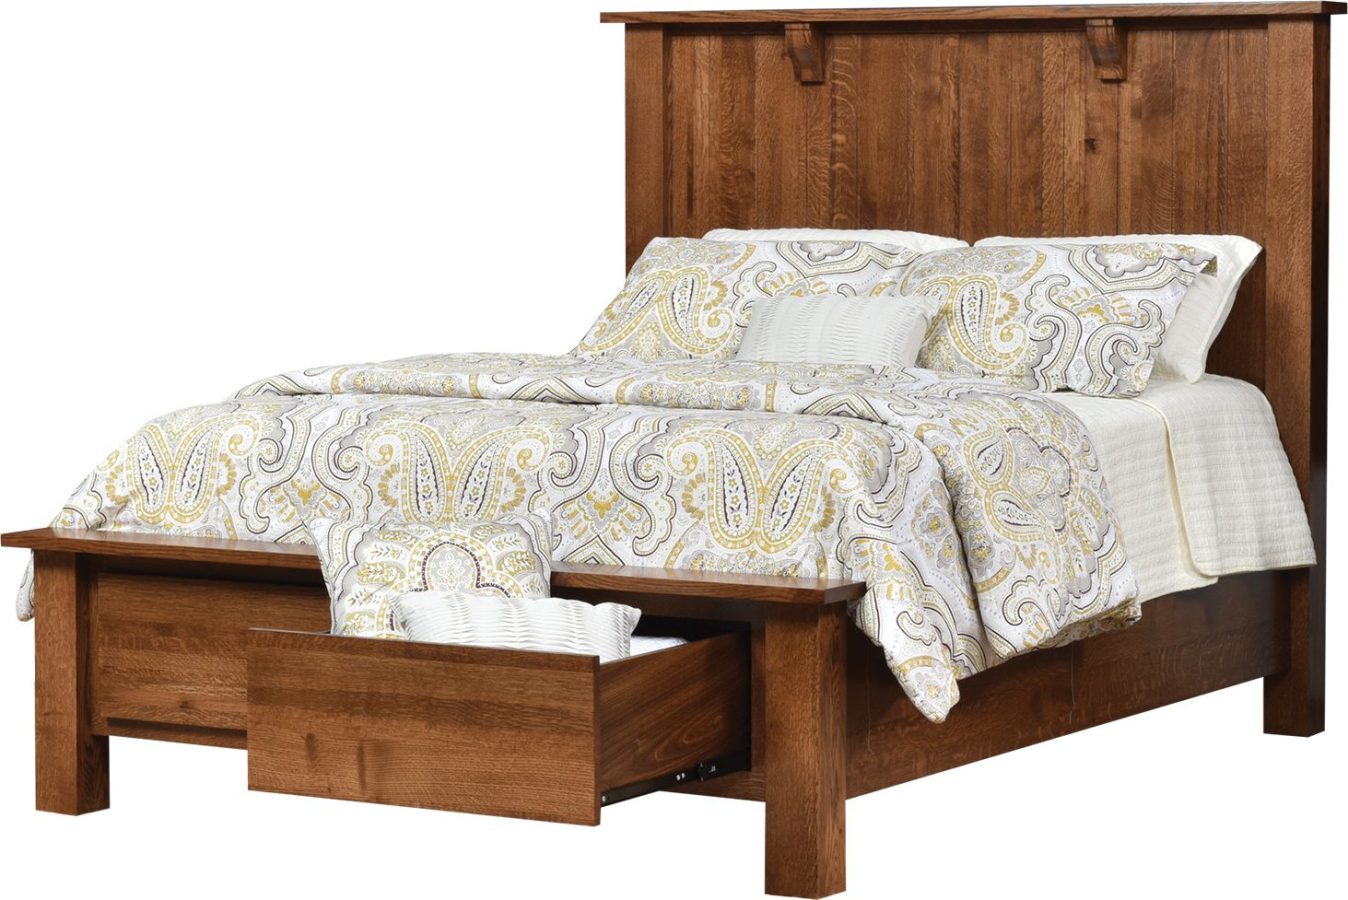 Koehler Creek Collection Bed w/Footboard Drawers